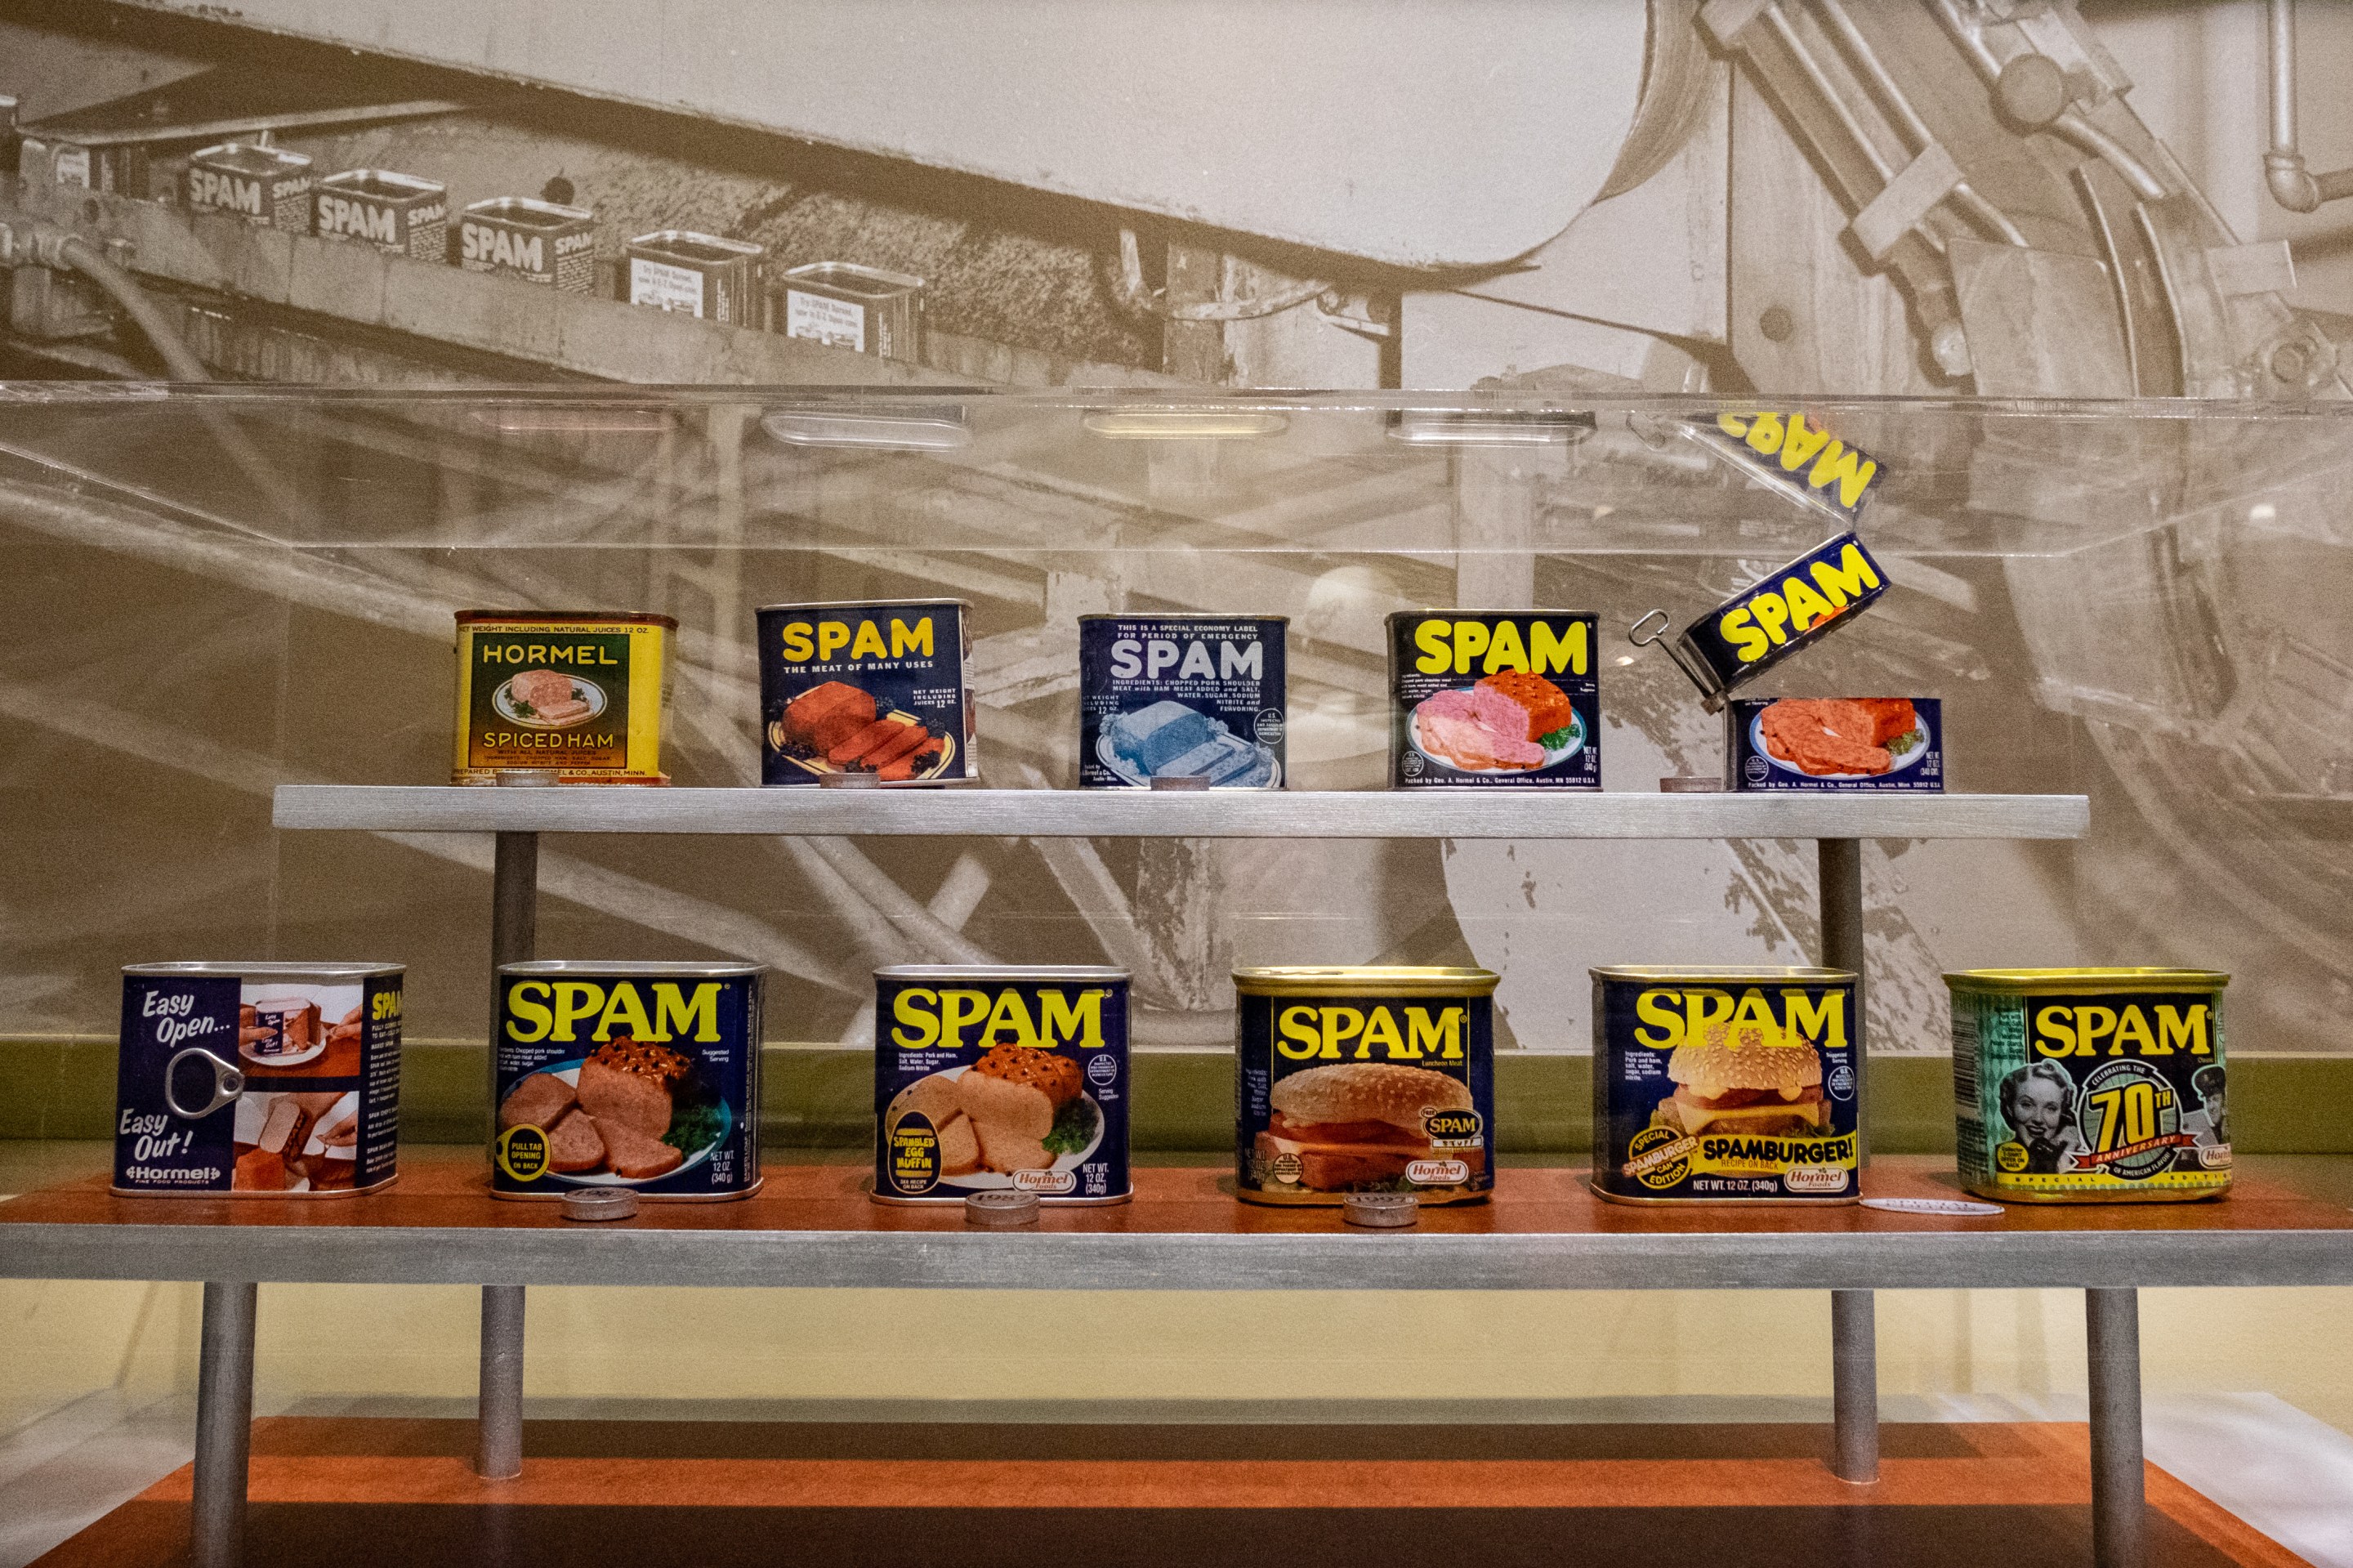 11 cans of Spam on display at the Spam Museum show how the can itself has changed over the years. The changes have been very minimal!